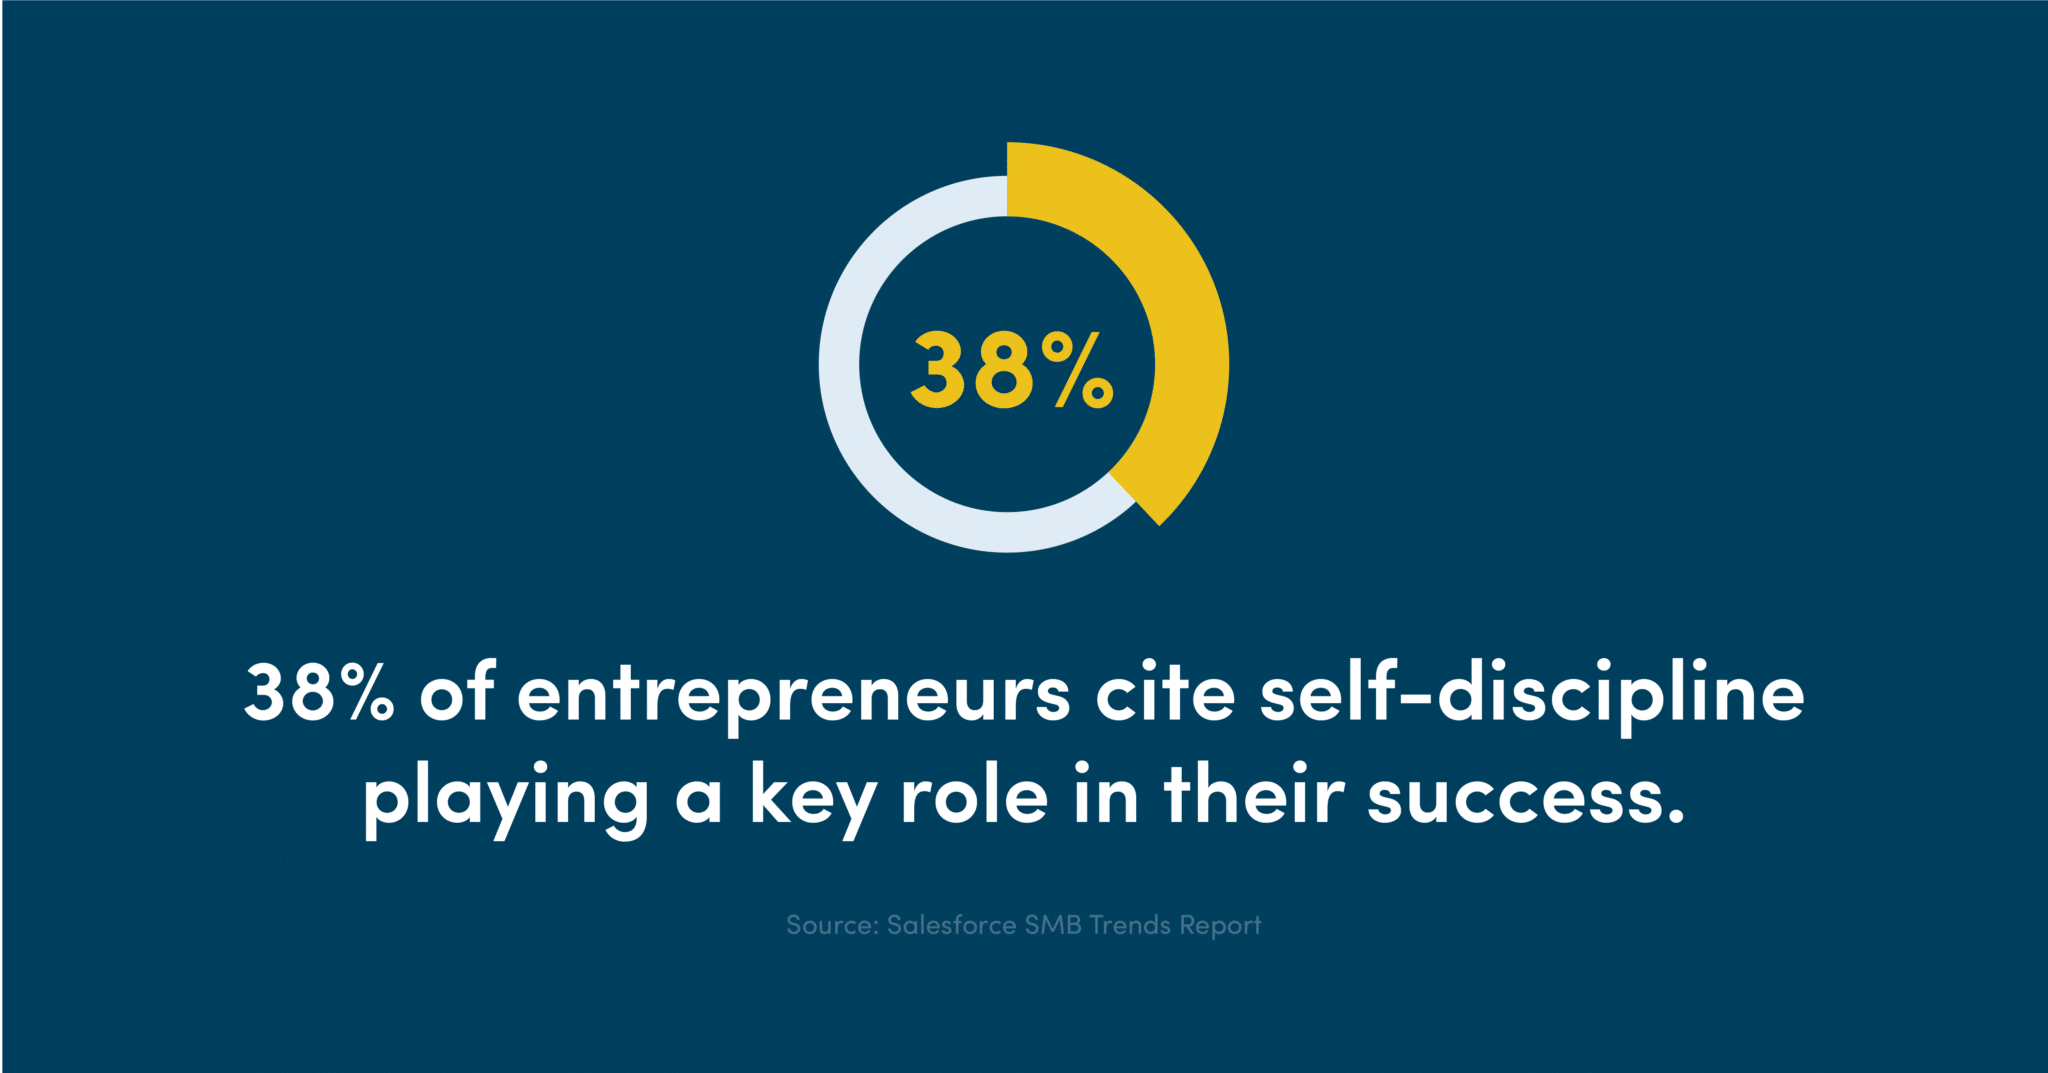 38% of entrepreneurs cite self-discipline playing a key role in their success.